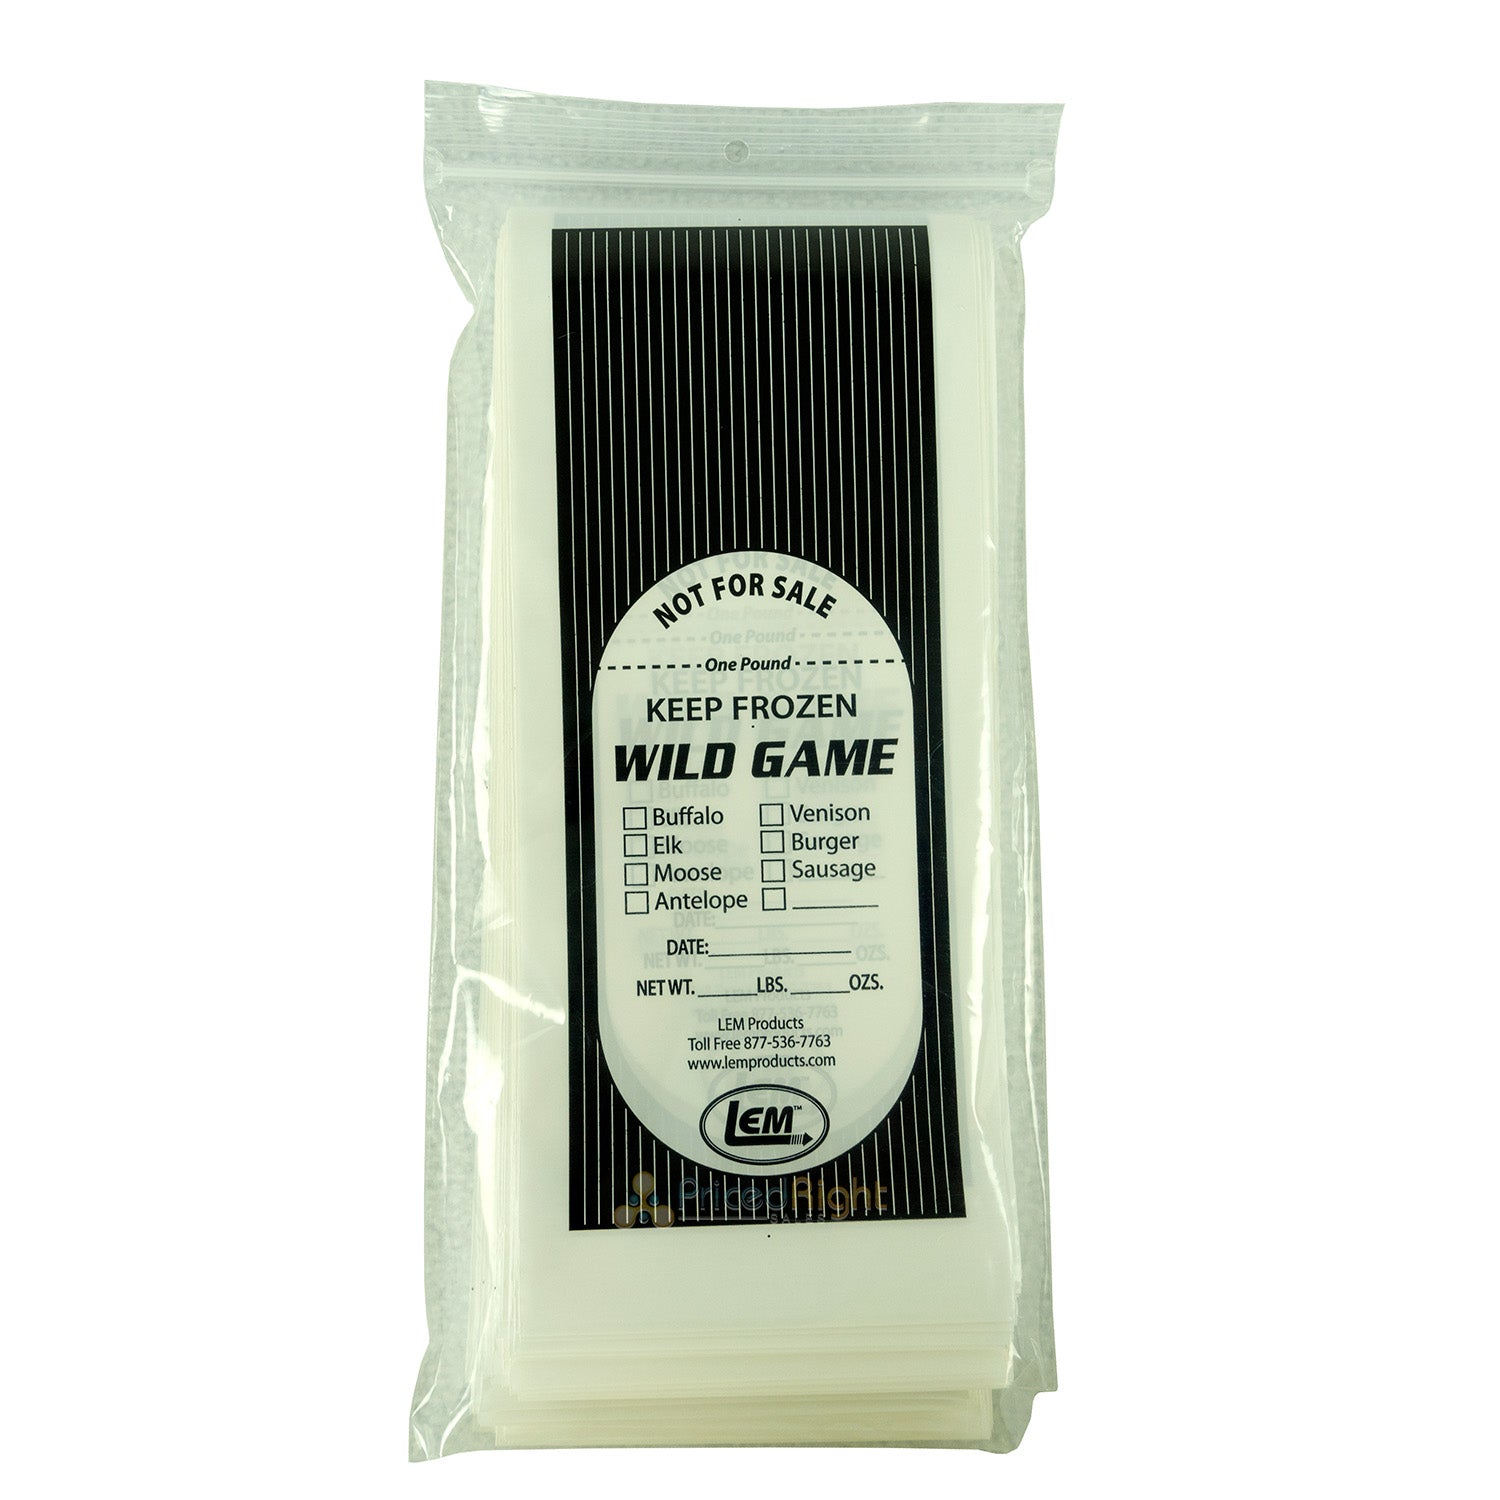 Wild Game Meat Bags, Meat Packaging